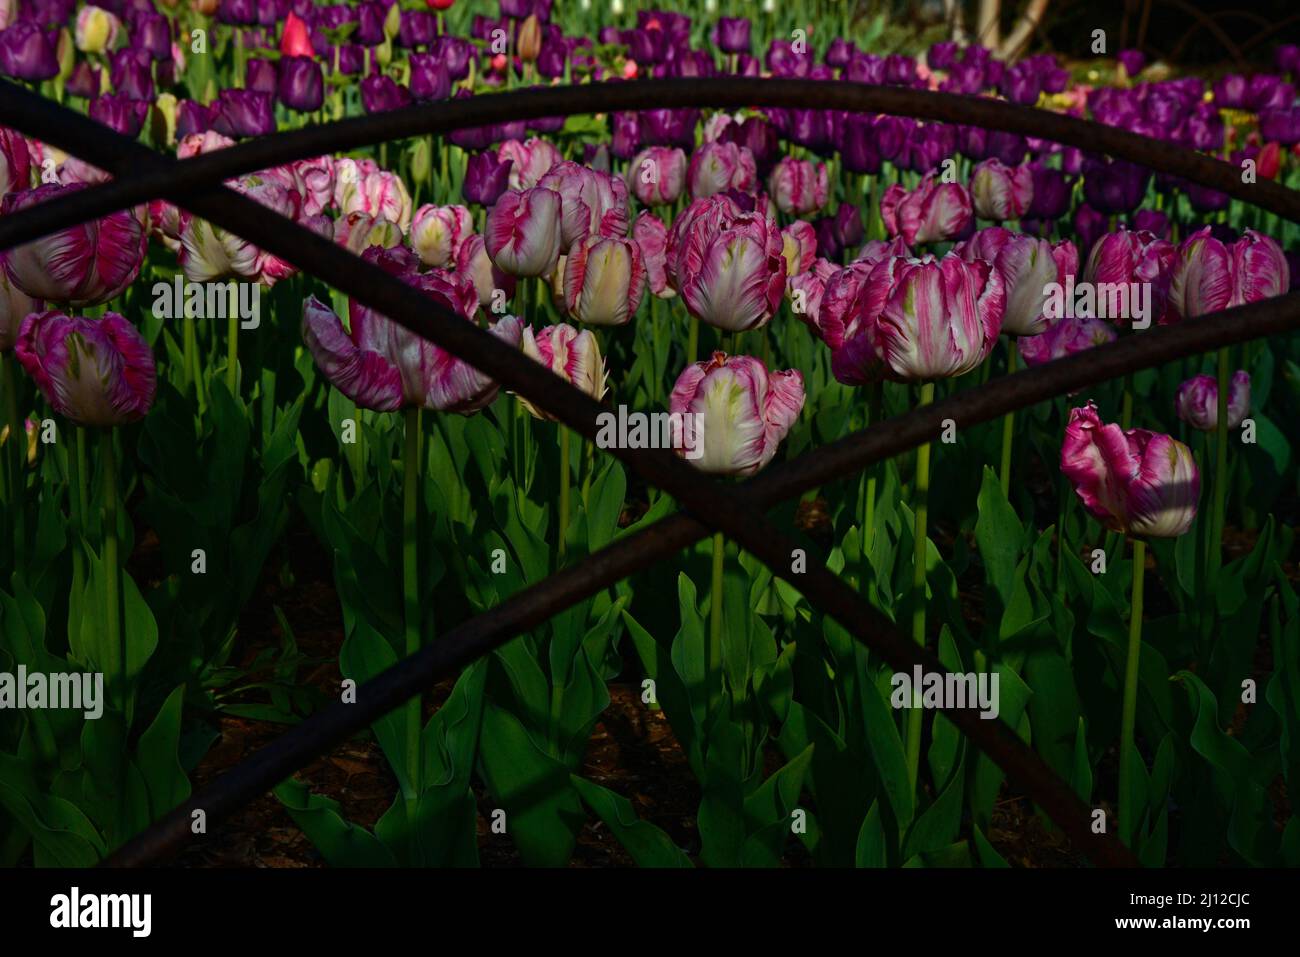 Garden full of  blooming tulip beauty & inspiration. Rich in color. textured patterns, growth & bursting with life Stock Photo